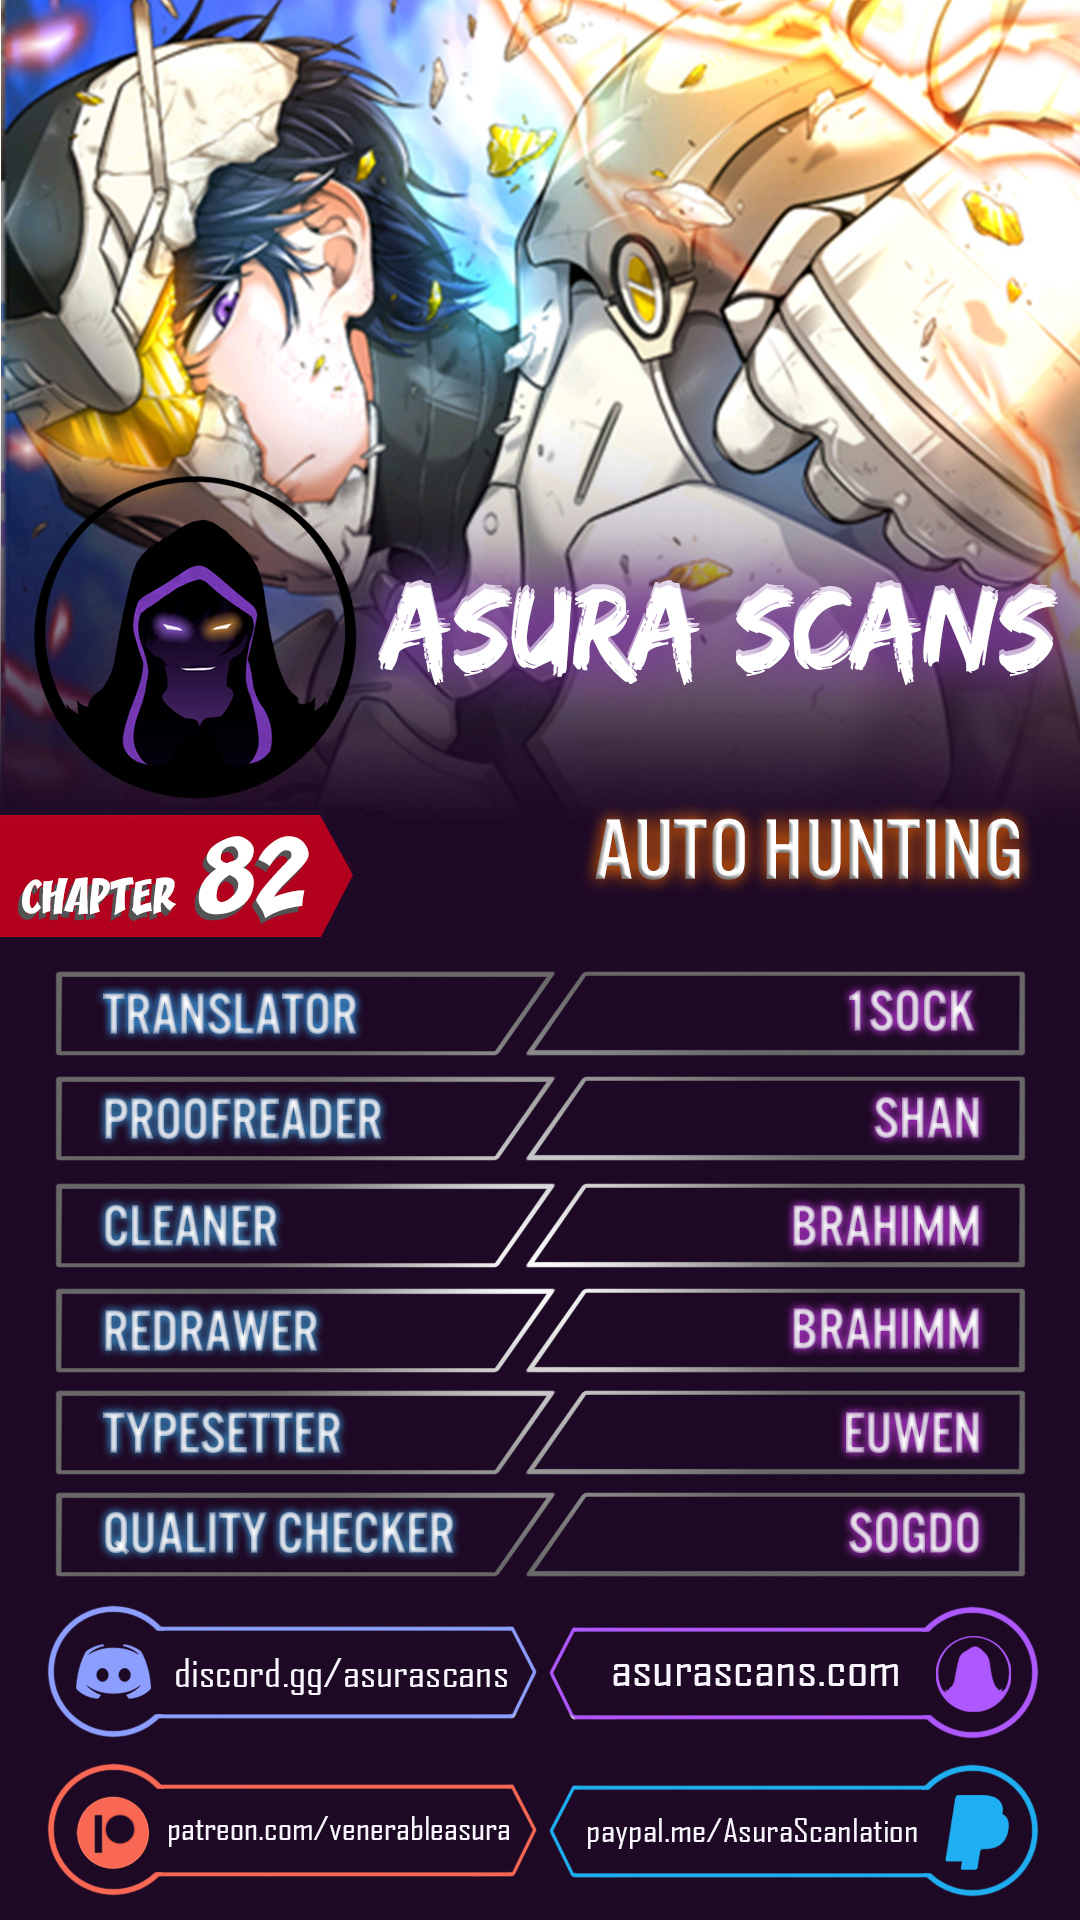 Auto Hunting Ch. 82